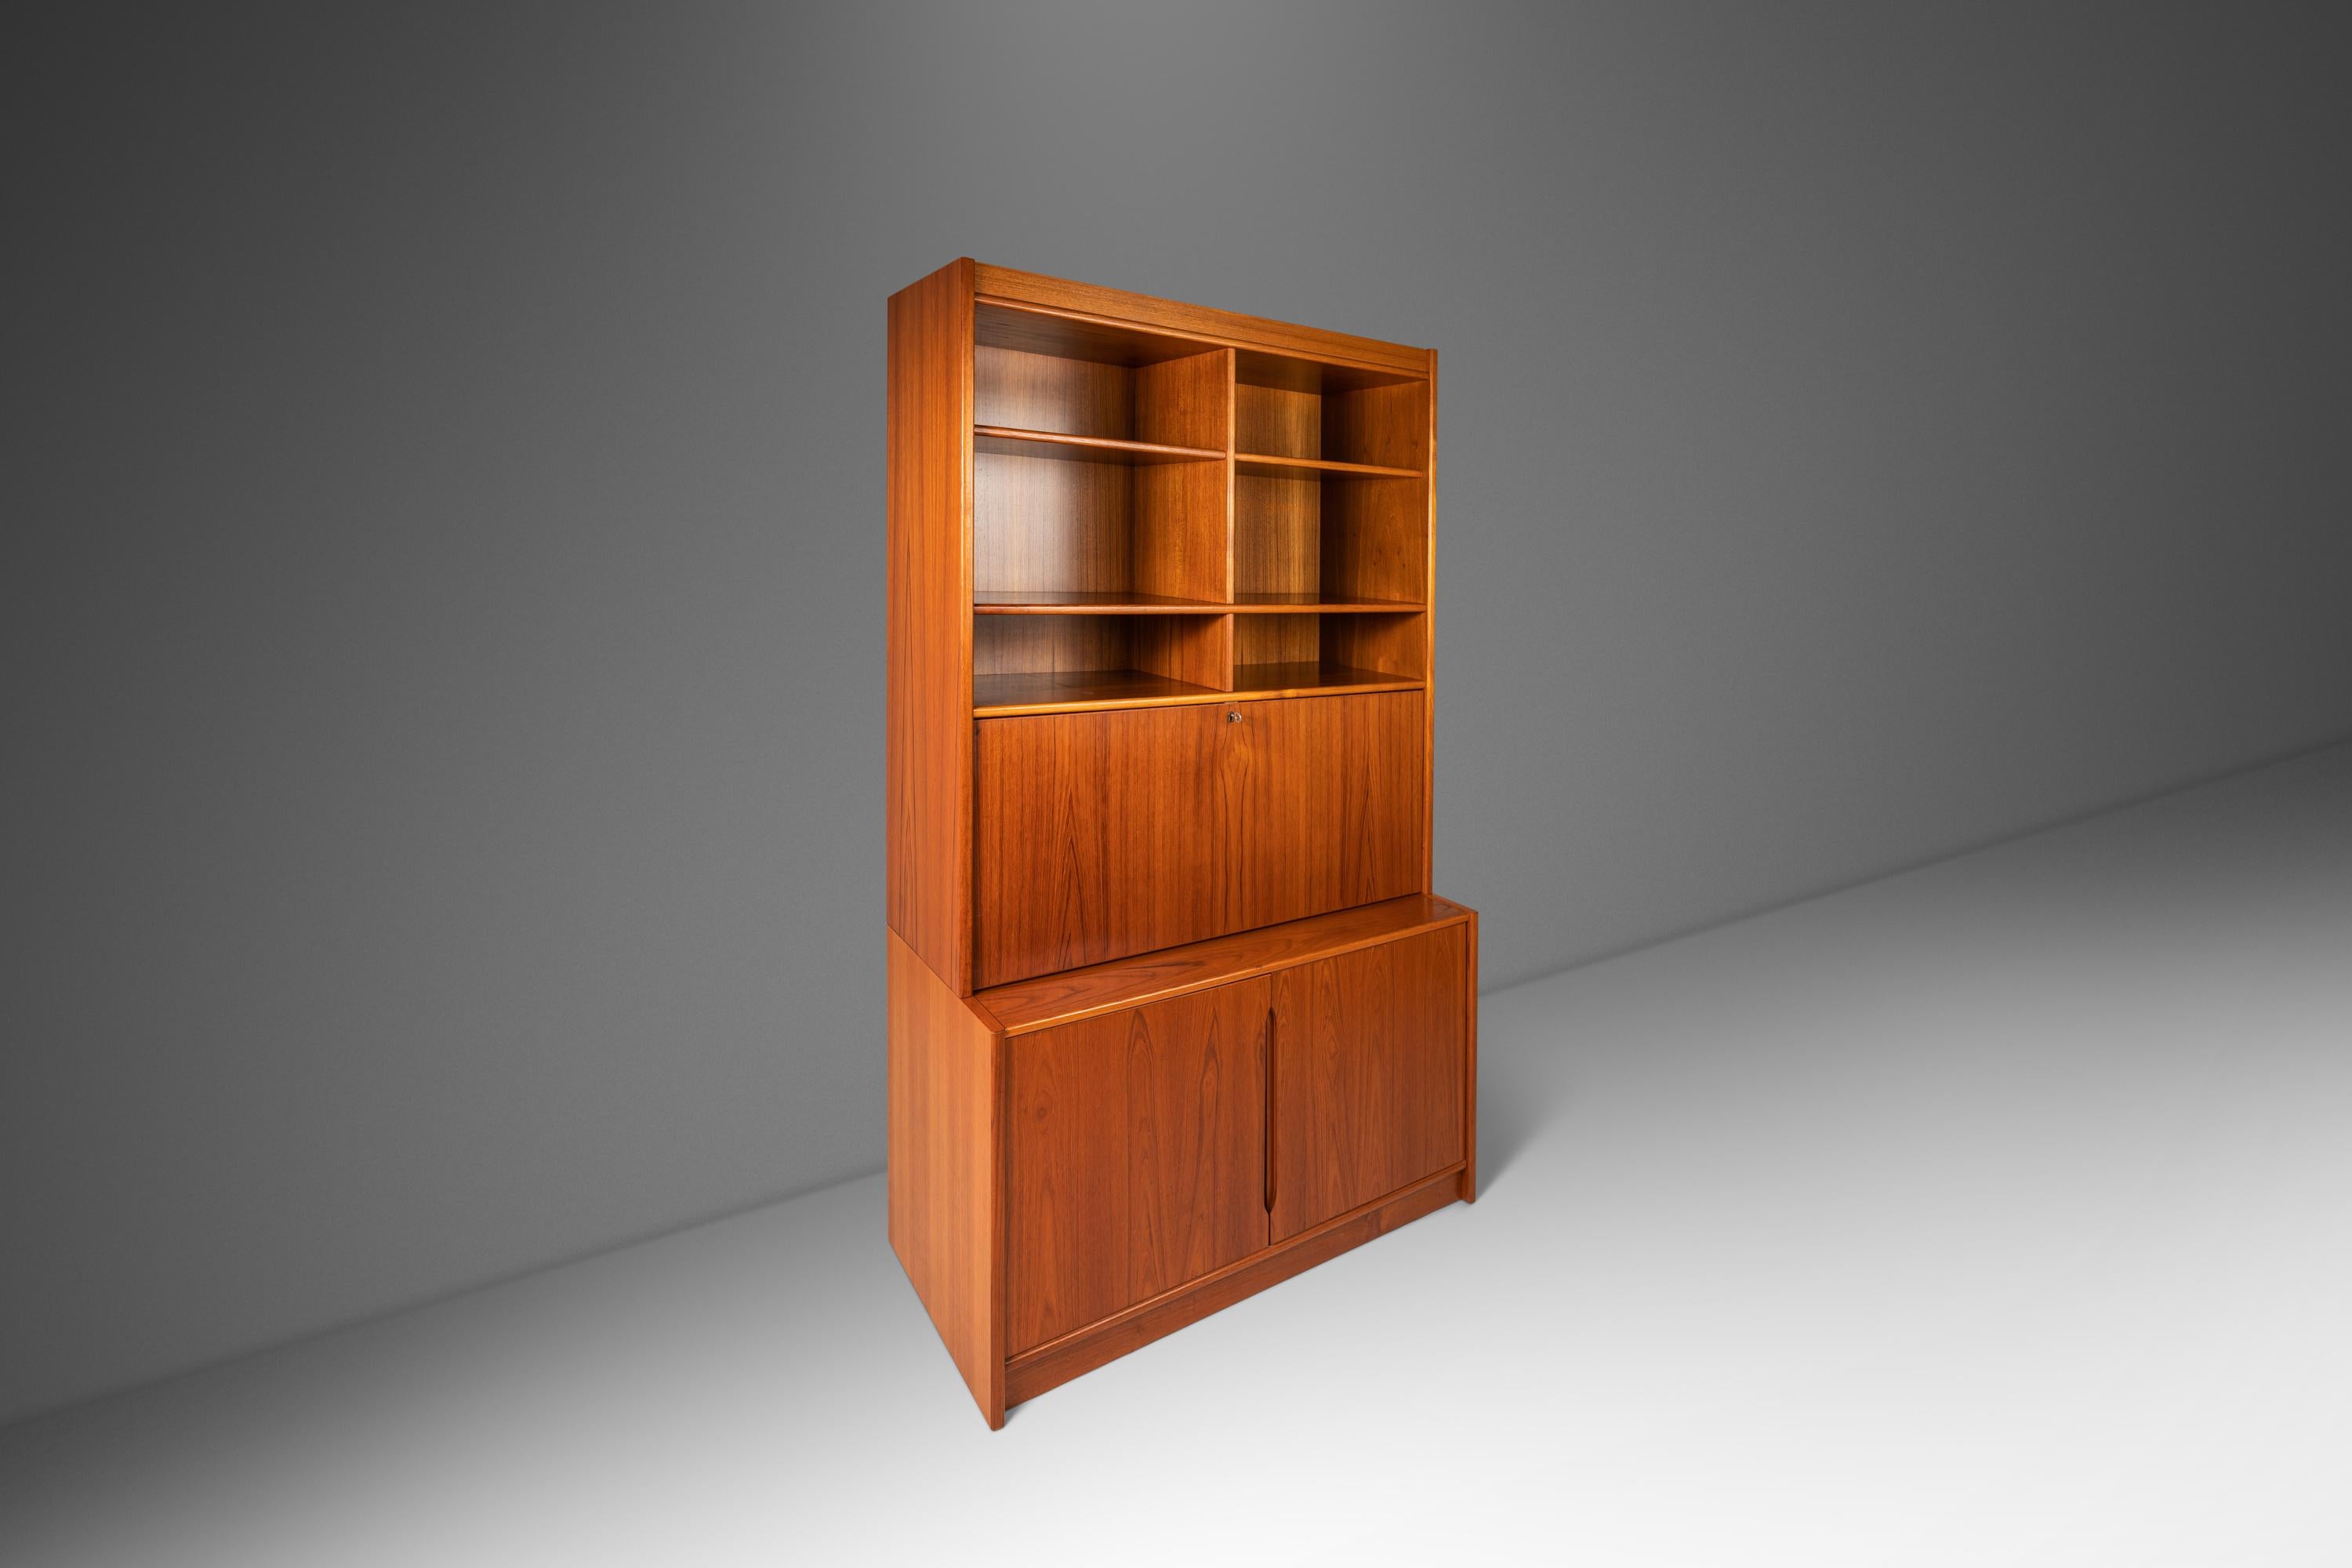 Equal parts elegance and functionality this gorgeous Danish Modern display cabinet is as versatile as it is beautiful. Featuring a drop-down secretary desk top with functioning lock and skeleton key this cabinet can serve both as a convenient desk